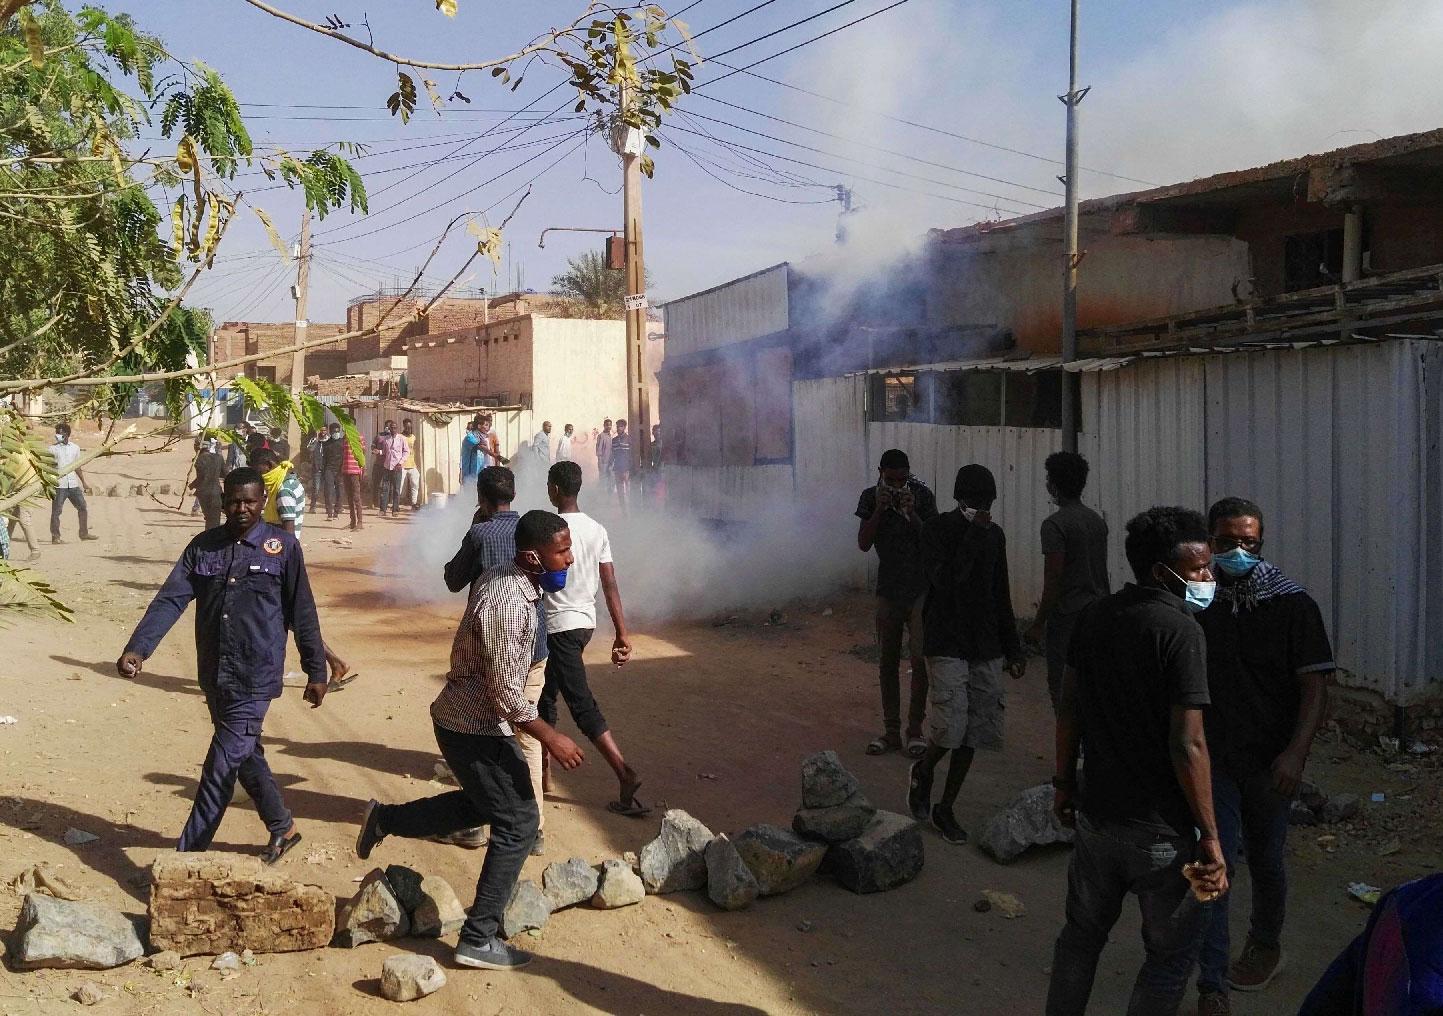 Sudanese protesters demonstrate against their government in the capital Khartoum's district of Burri on February 24, 2019.